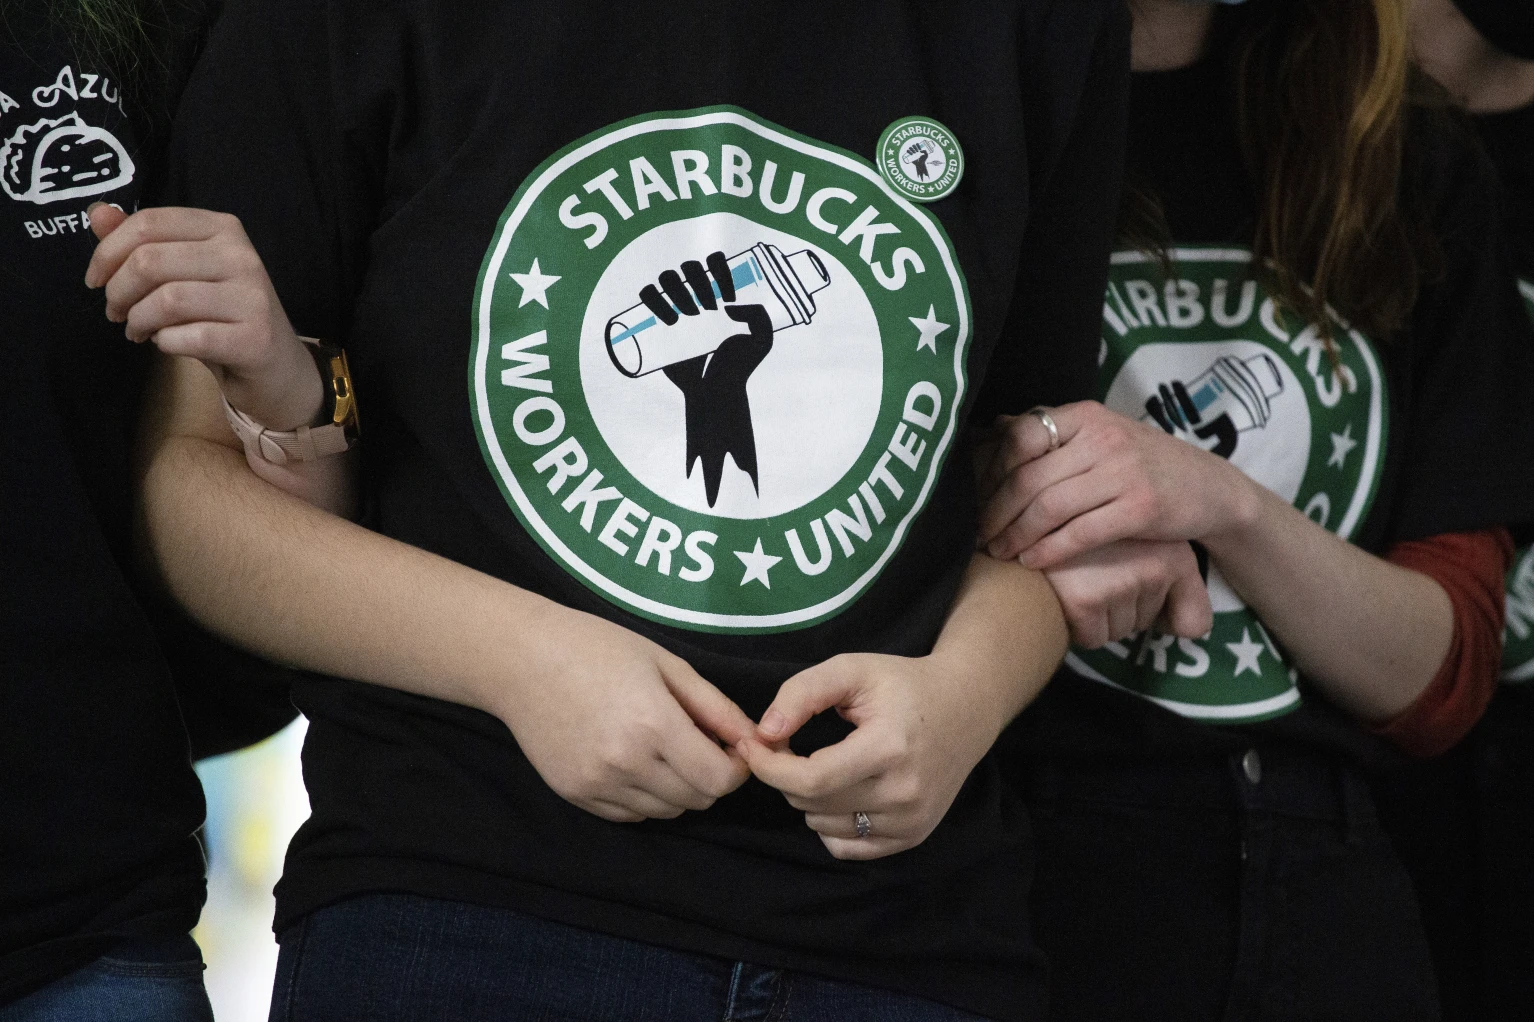 Workers at 200 Starbucks stores walk off job on busy Red Cup Day to protest labour practices